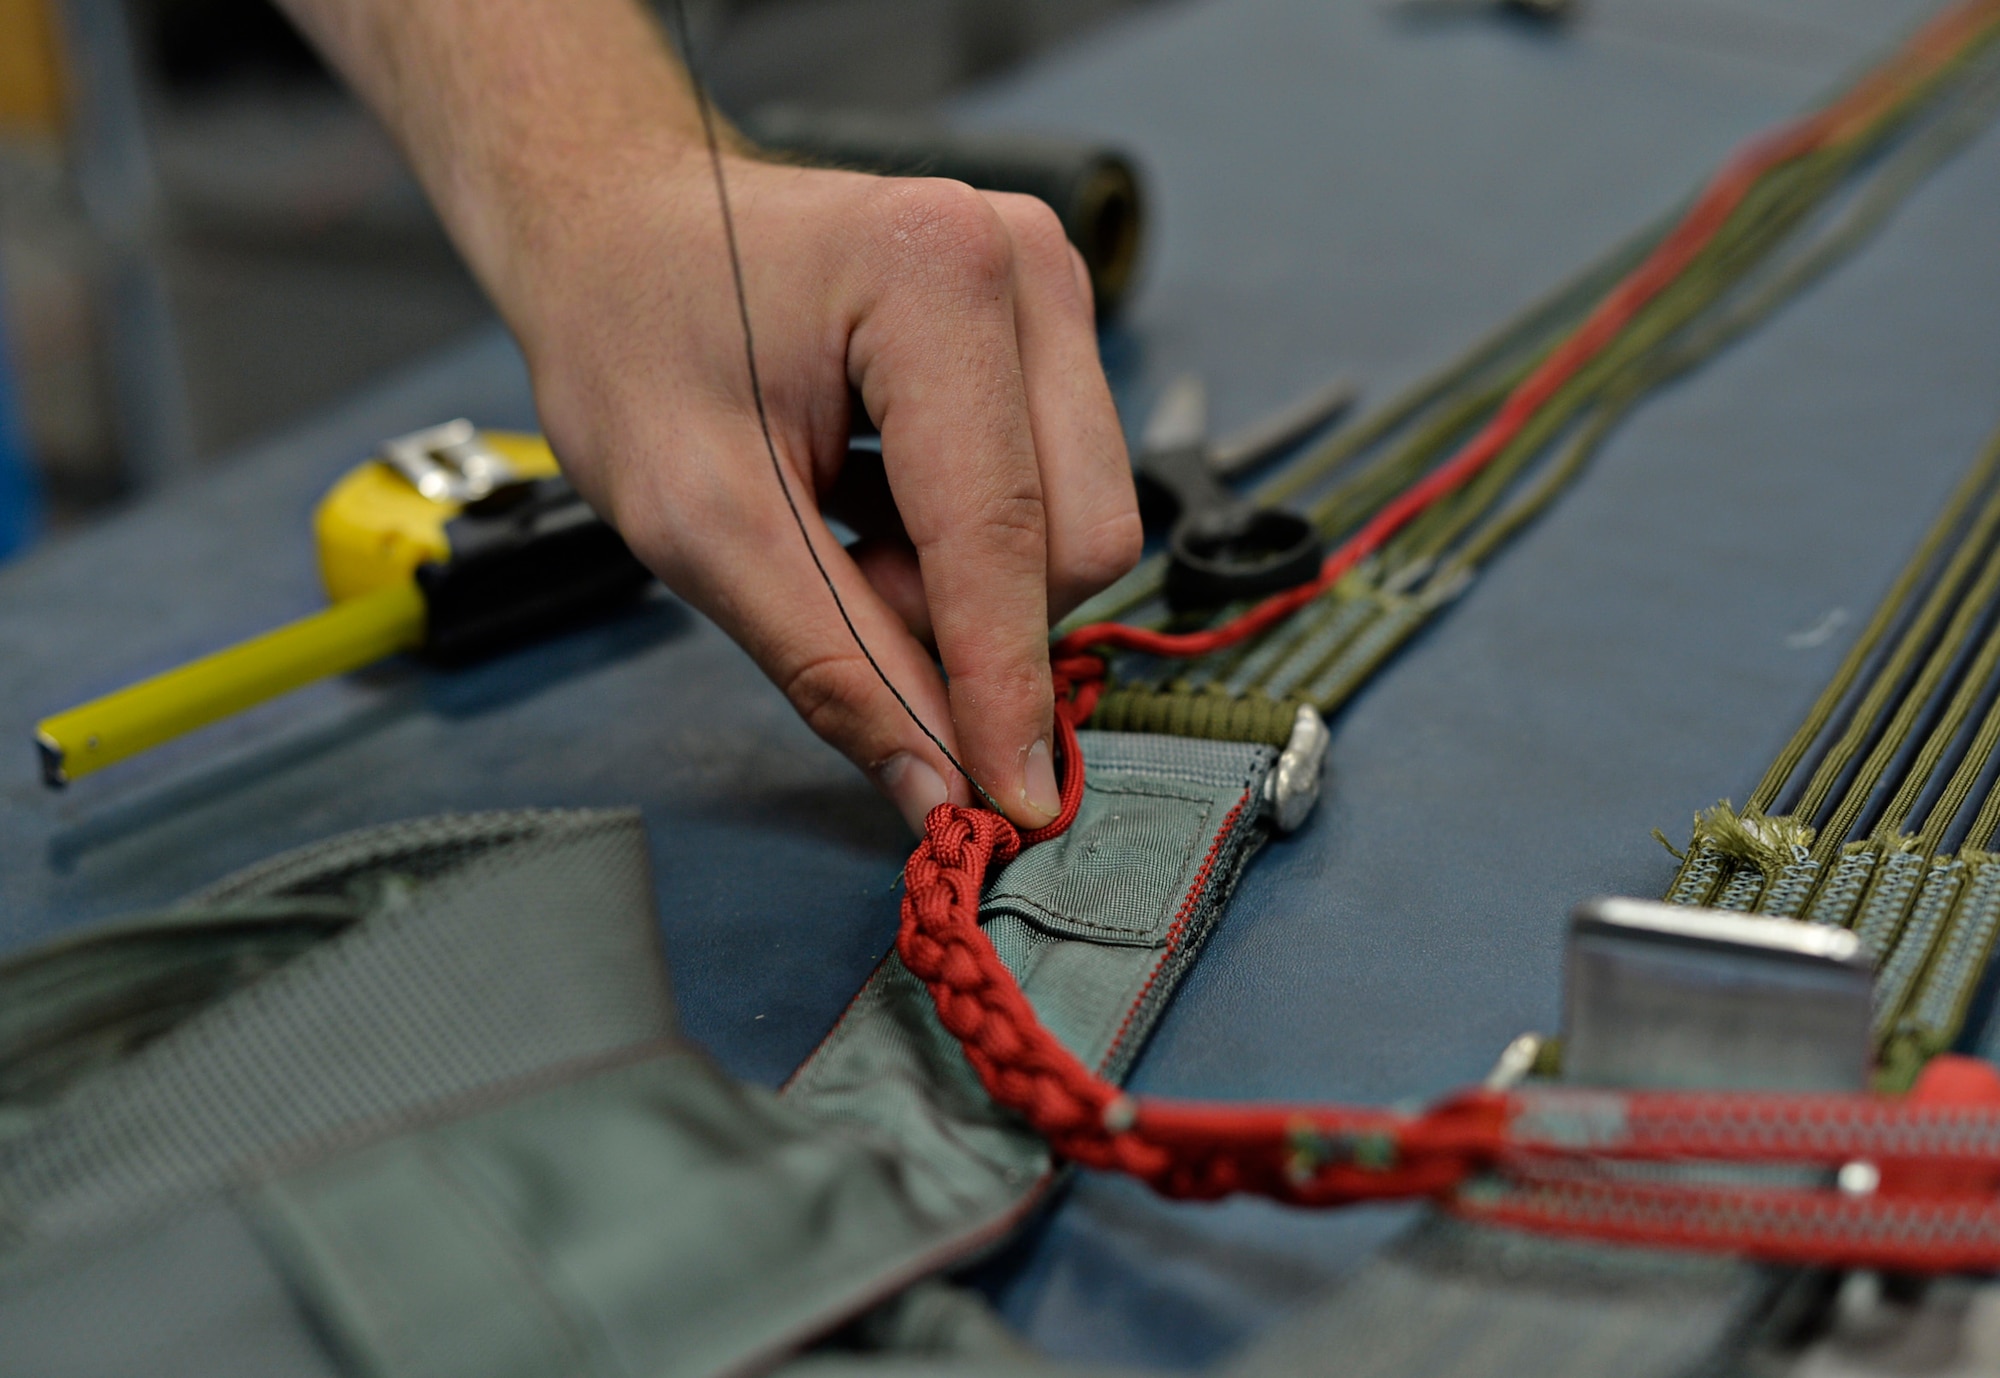 Airman 1st Class Caleb Witham, 86th Operations Support Squadron aircrew flight equipment apprentice, tacks a four-line Jenson on a BA-22 parachute for annual inspections, July 25, 2016 at Ramstein Air Base, Germany. Attention to detail is key for AFE Airmen; they repair, test and inspect all flight equipment and must ensure it is fully operational for aircrew in everyday and emergency situations. (U.S. Air Force photo/Senior Airman Nesha Humes)